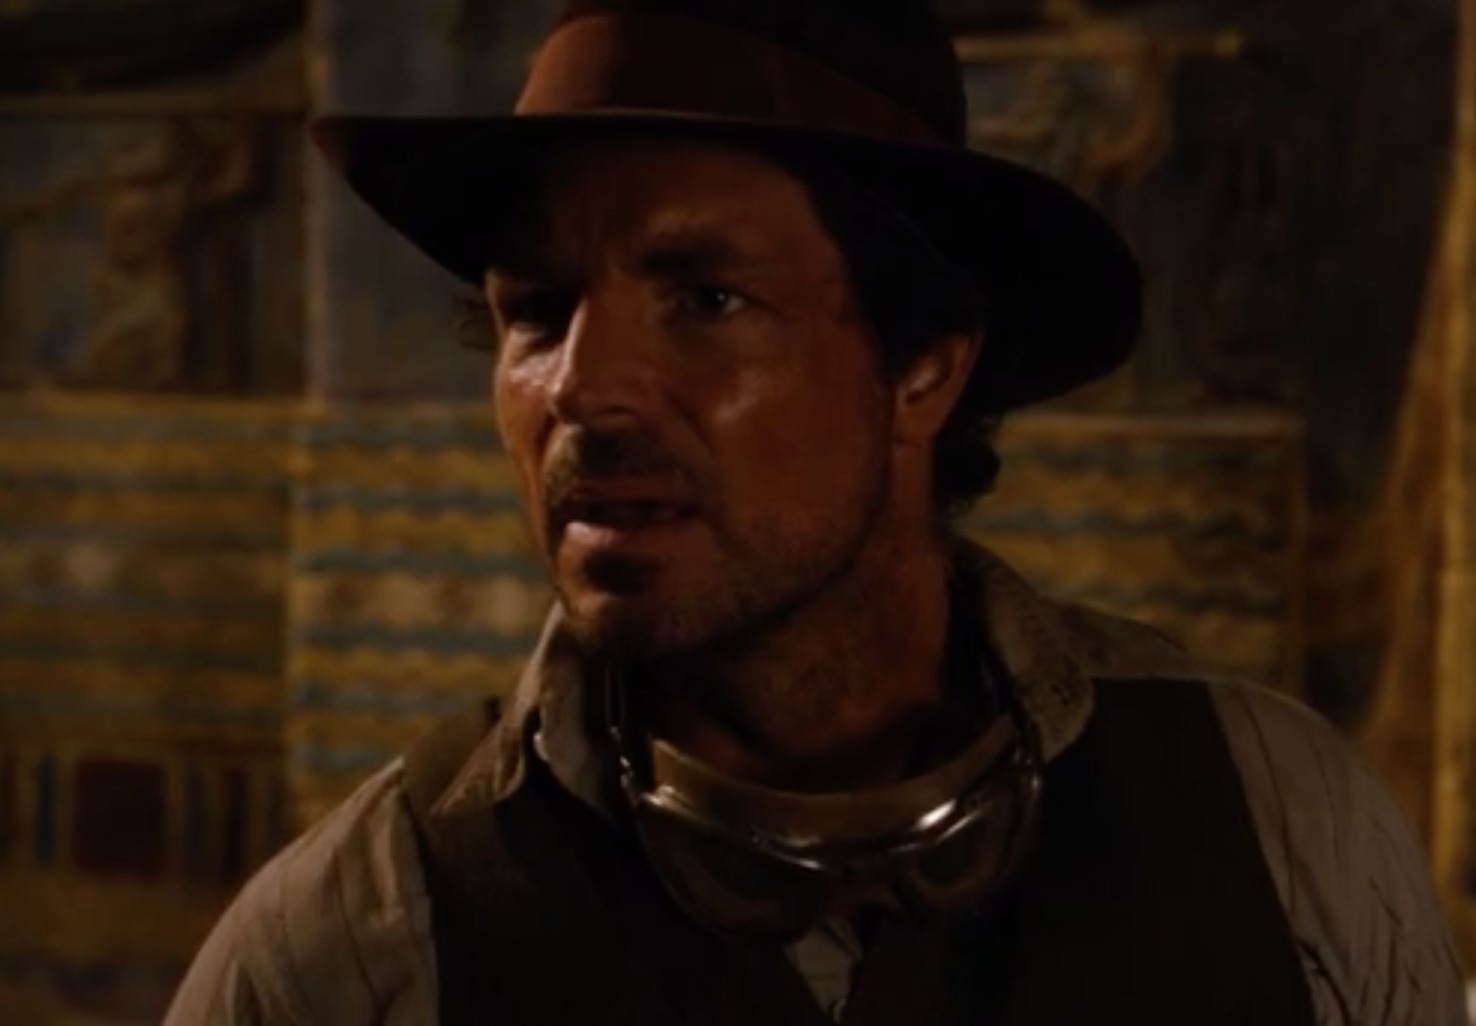 still from Night At The Museum: Secret of The Tomb (2014)